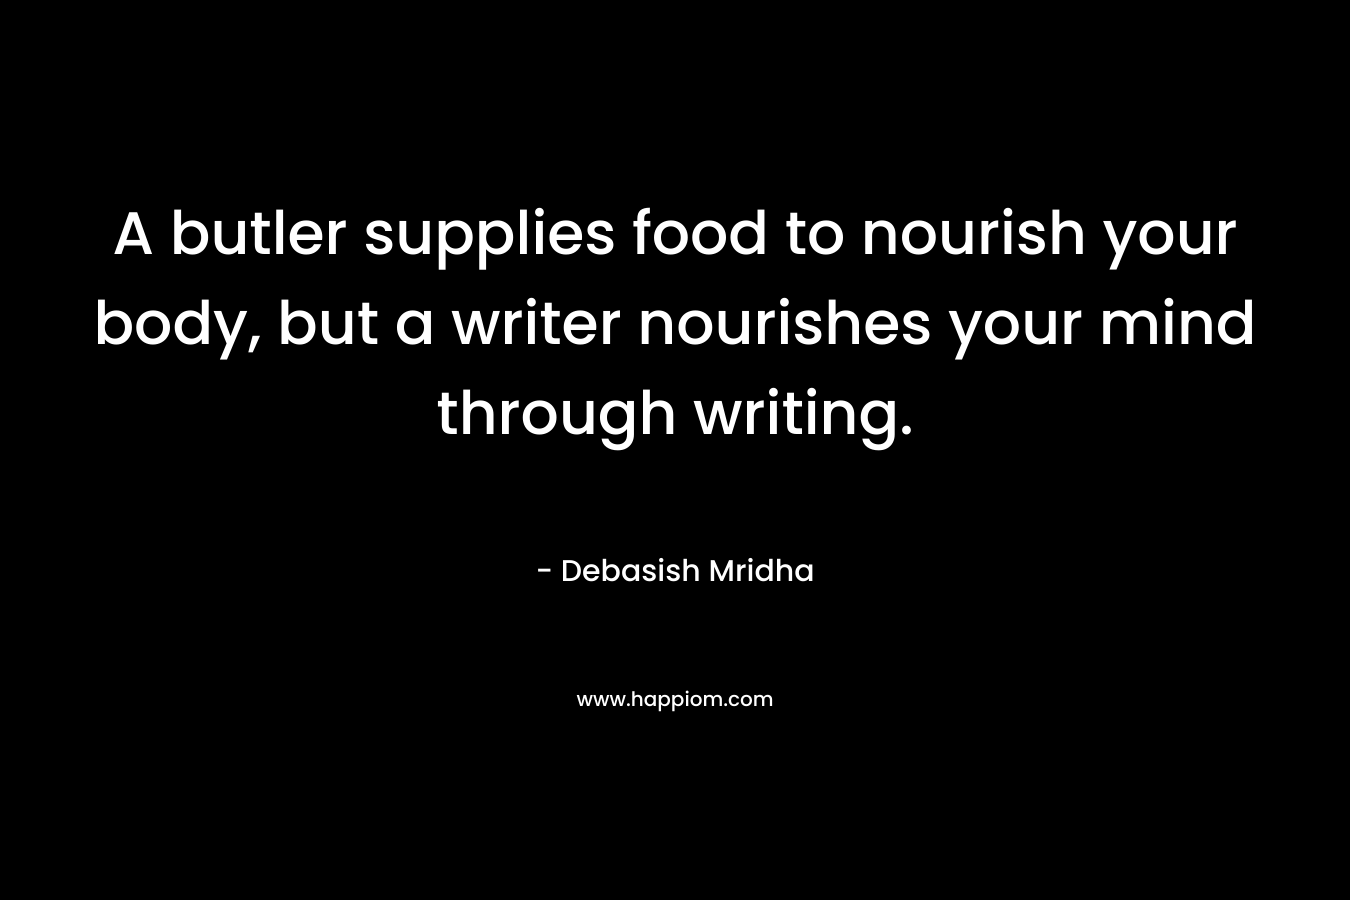 A butler supplies food to nourish your body, but a writer nourishes your mind through writing. – Debasish Mridha